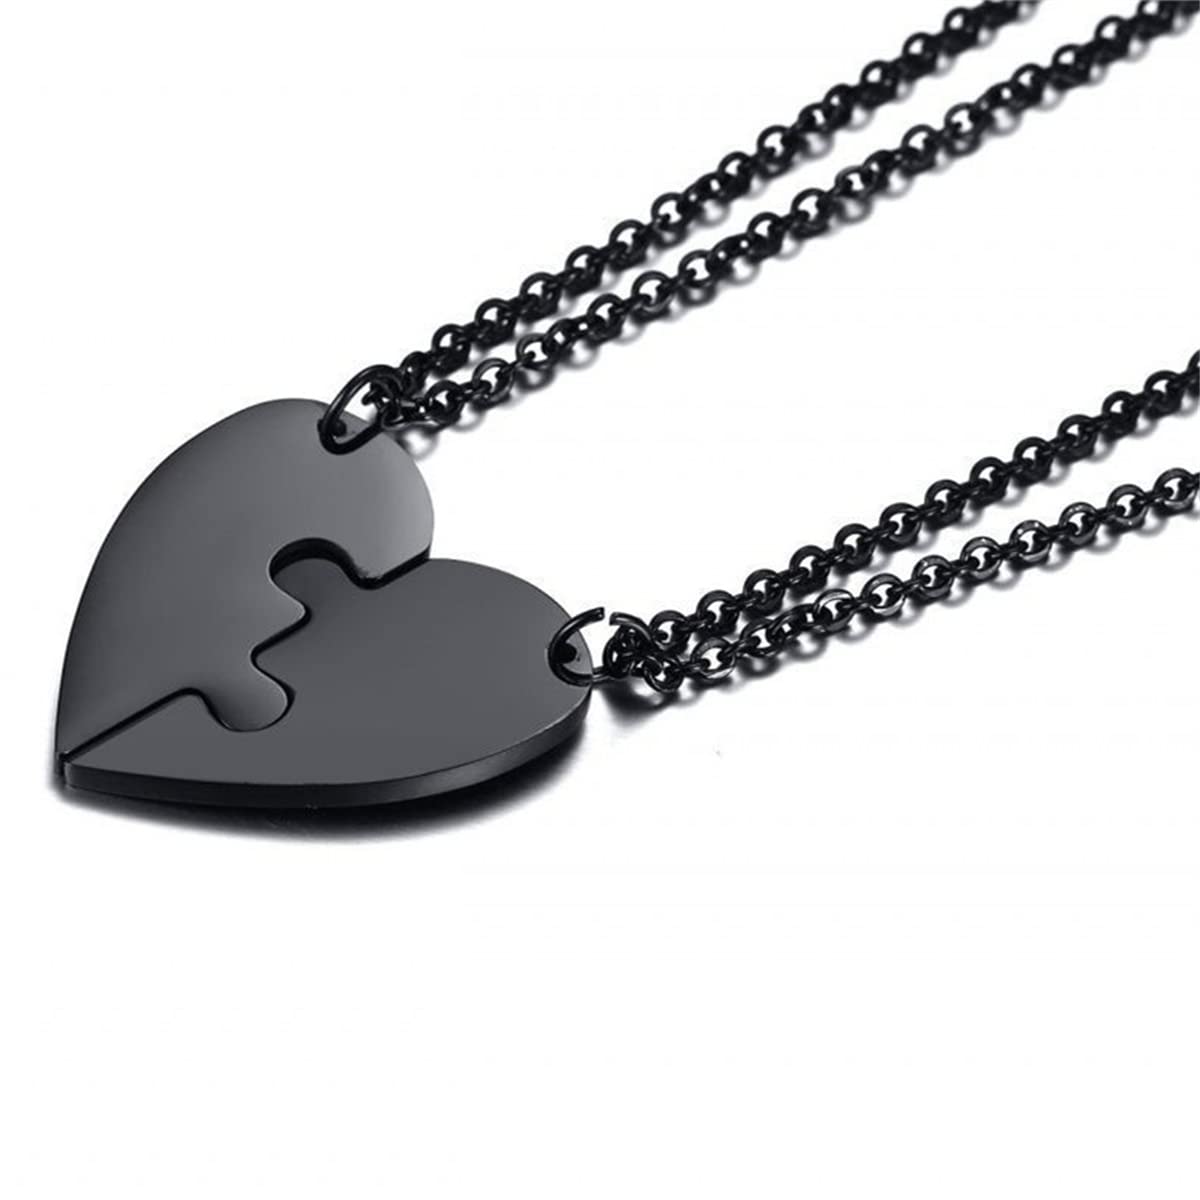 JOYA GIFT 2 Pieces Gold Stainless Steel Heart-shaped Necklace Puzzle set Black Couple Necklace His and Her Pendant Necklaces Matching for Boyfriend Girlfriend Best Friends Jewelry Gift